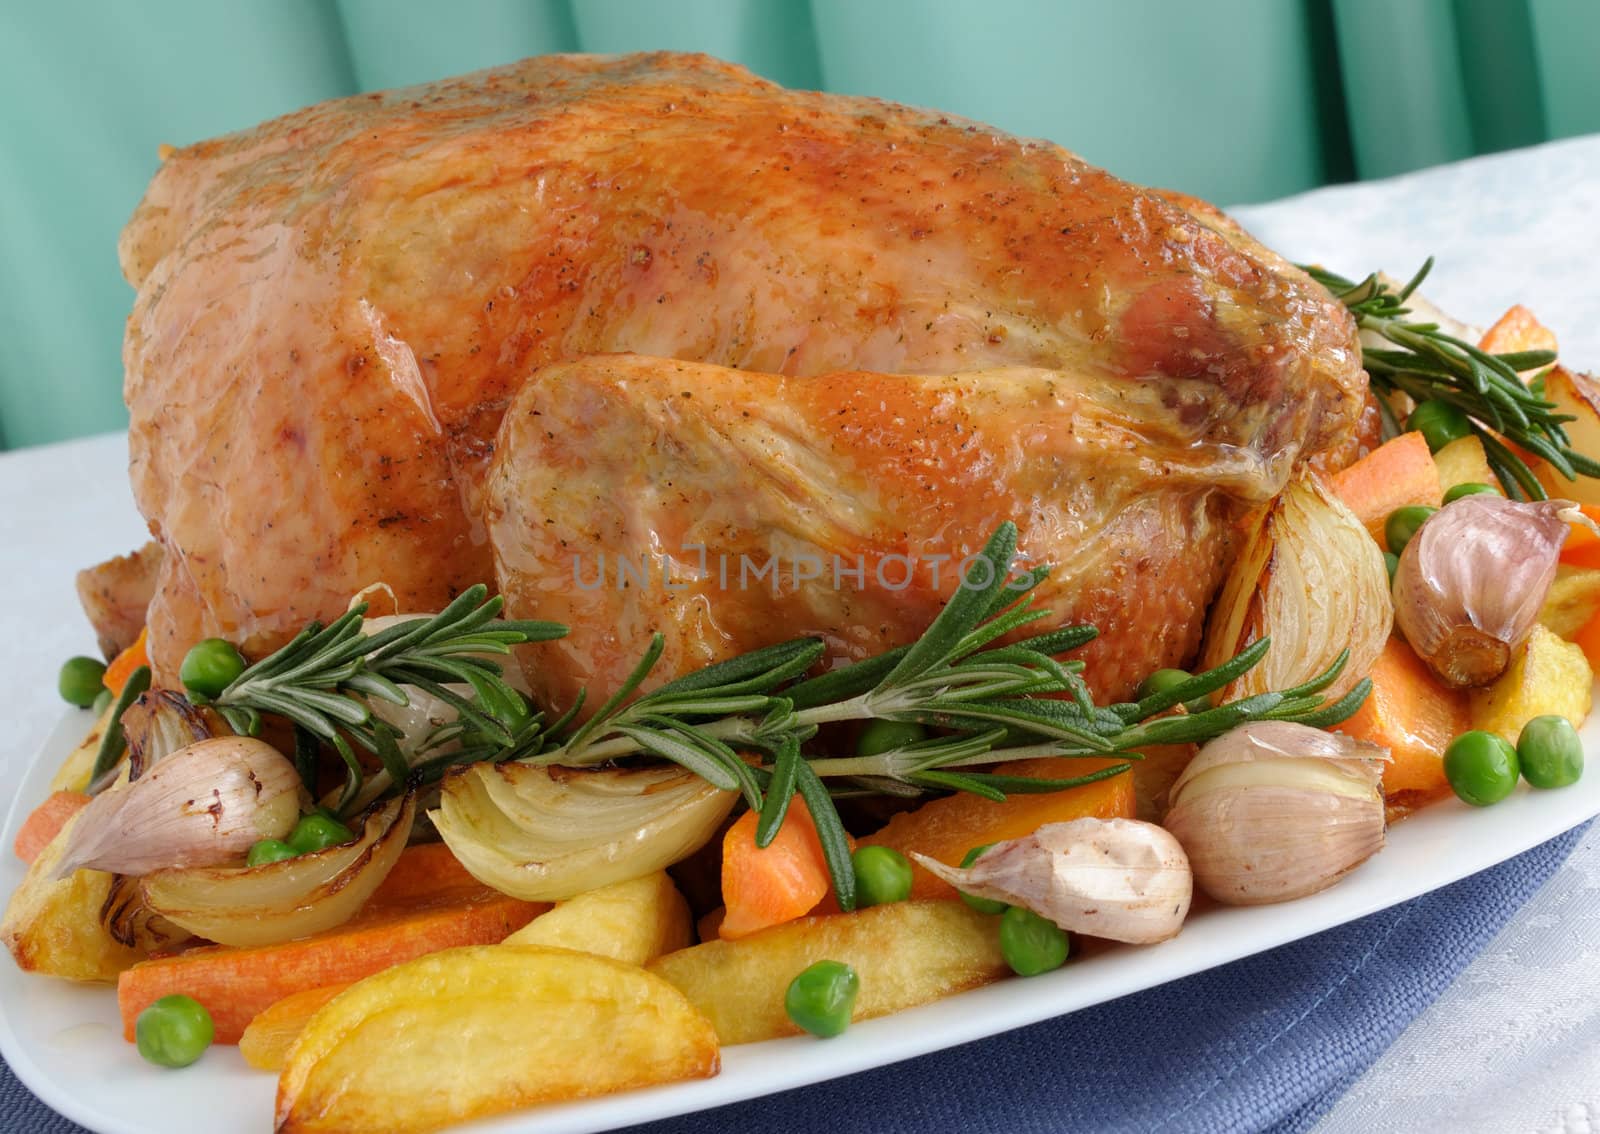 Roasted Chicken with Vegetables by Apolonia